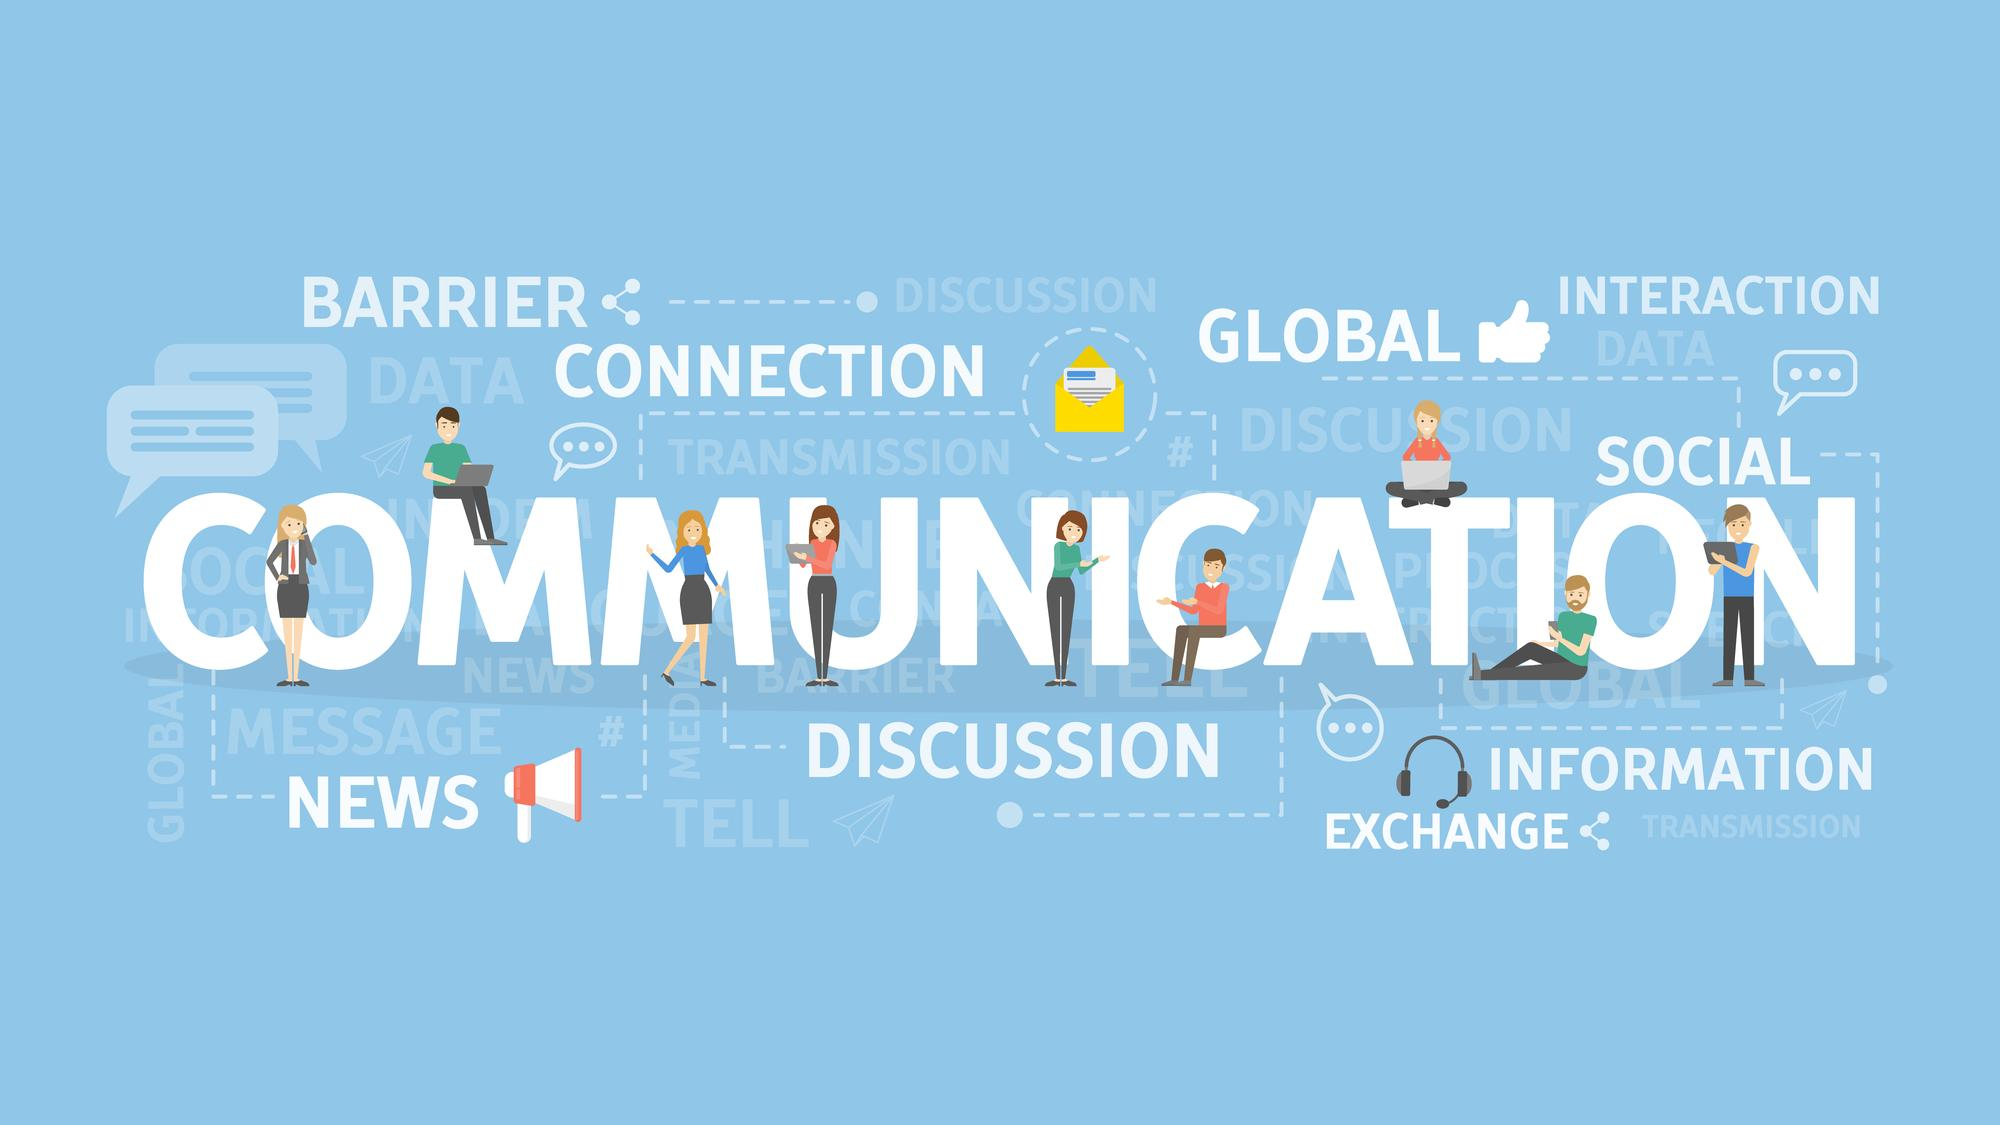 effectively communicate